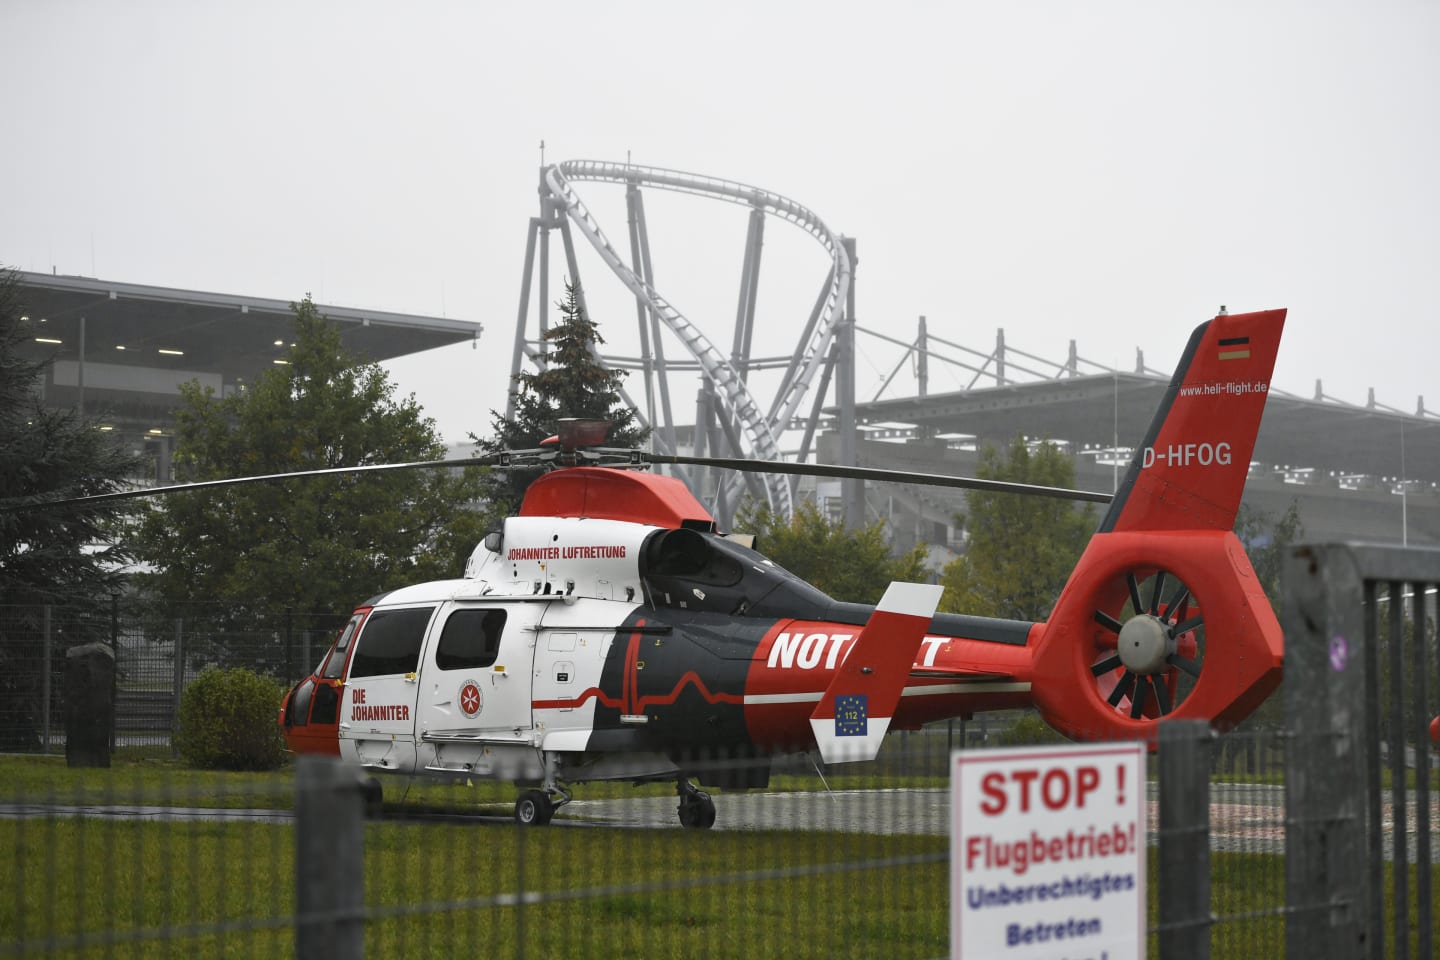 NUERBURG, GERMANY - OCTOBER 09: The medical helicopter is pictured outside the medical centre in